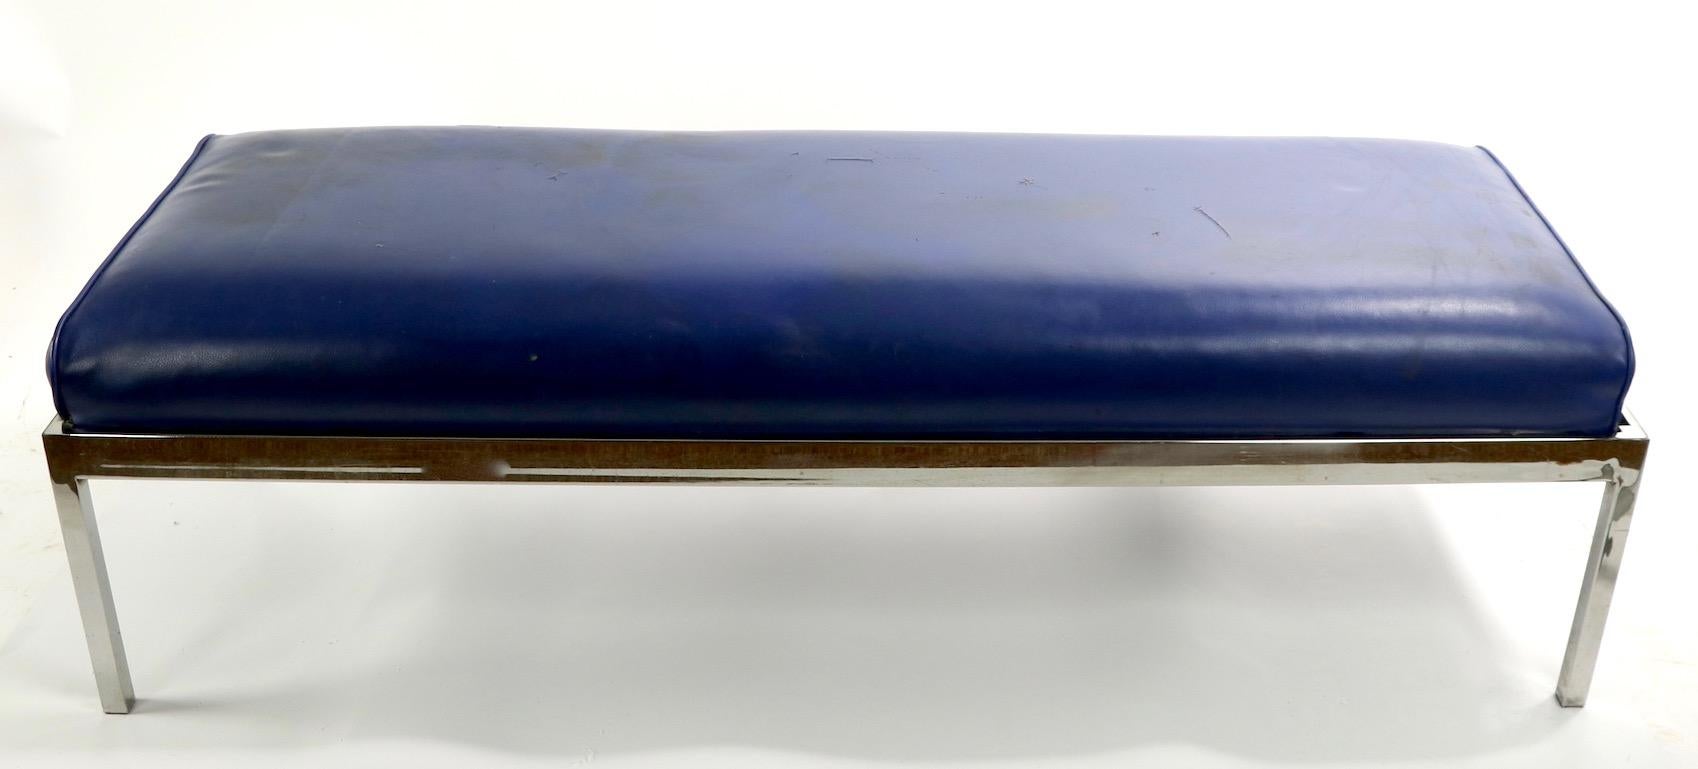 Rectangular chrome base bench with blue vinyl upholstered seat. The bench has a squared chrome base and thick 
( 4 inch ) upholstered pad top. This example shows some cosmetic wear, the top pad has various rips etc, and chrome finish shows minor